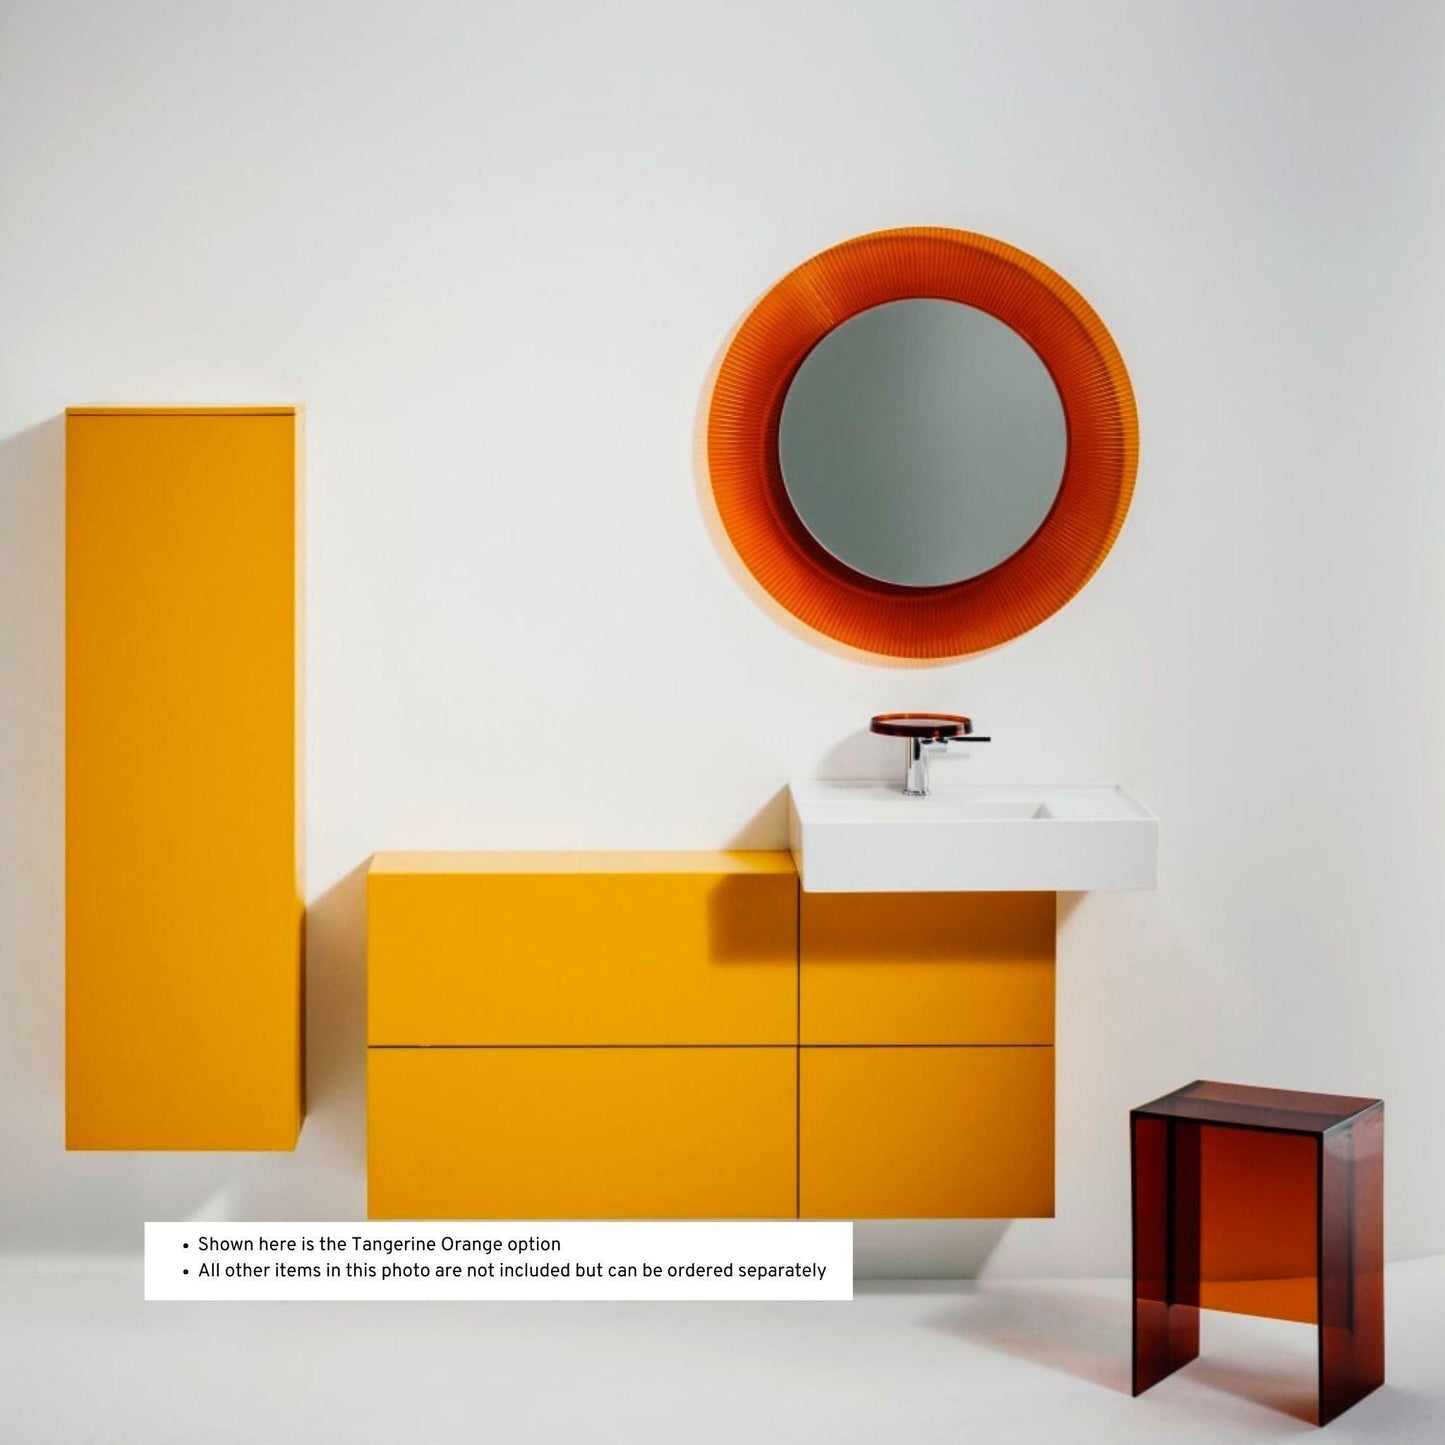 Laufen Kartell 7" Tangerine Orange Disc Tray for Toilet Paper Holders, Faucets, and Wall-Mounted Trays